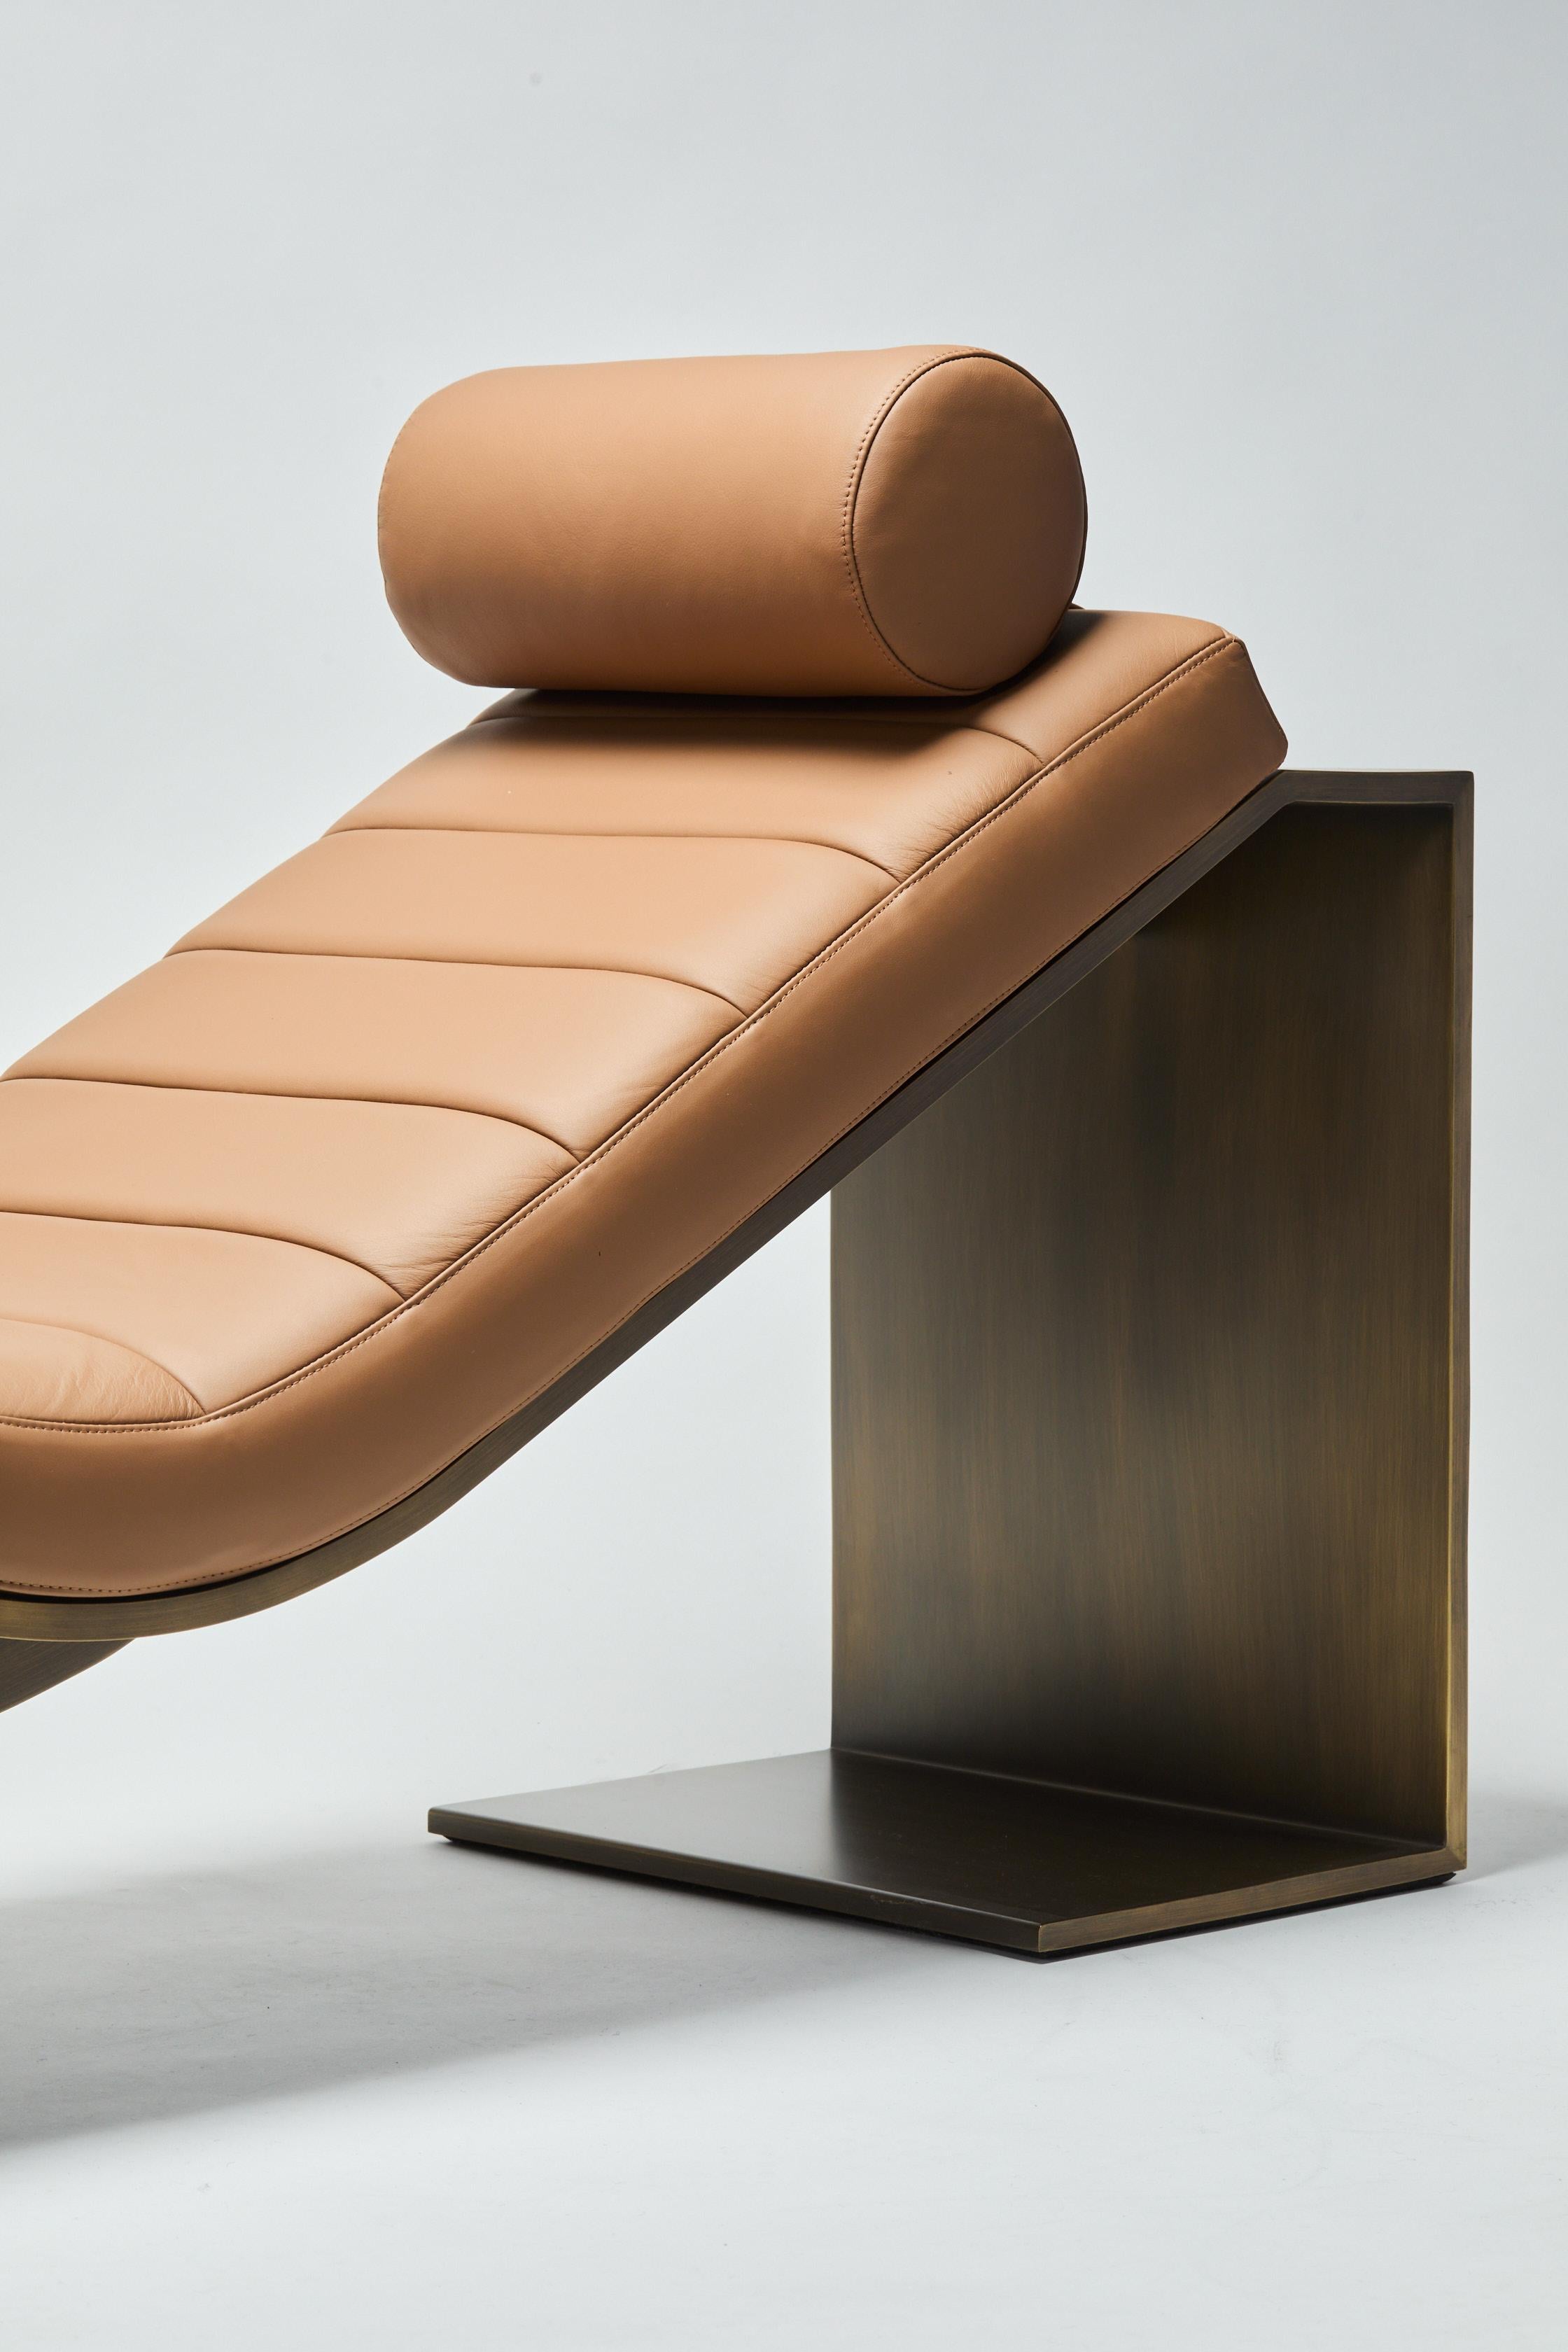 Bronze & Leather Bench, KIMANI Lounge by Reda Amalou, 2019, Gallery Collection For Sale 1